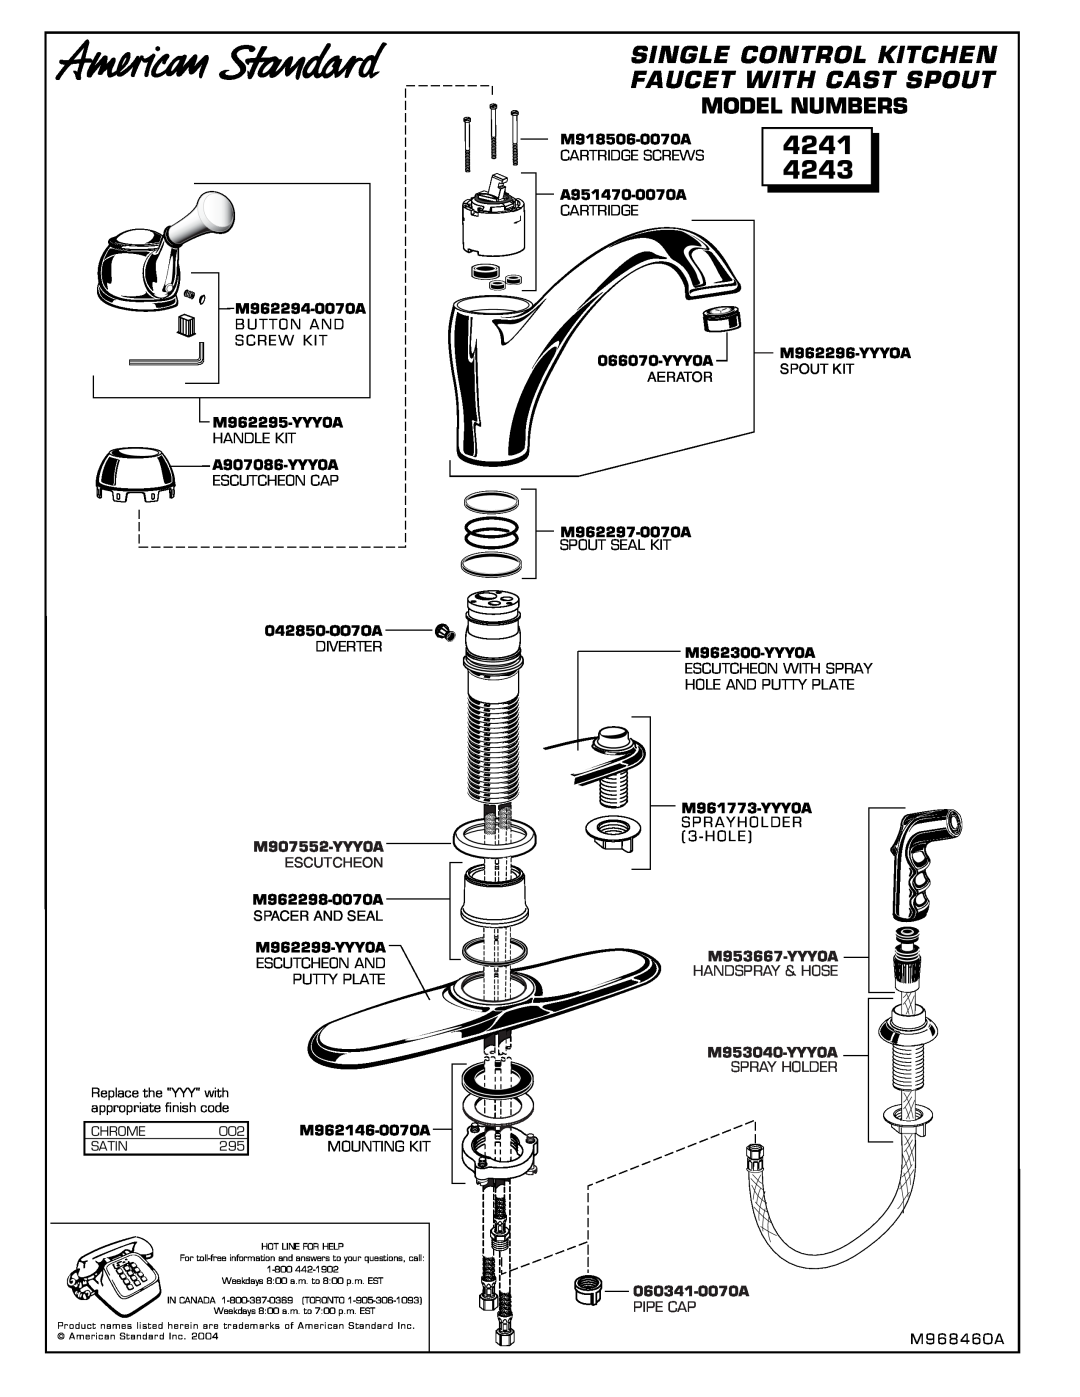 American Standard 4243 Model Numbers, 4241, Single Control Kitchen Faucet With Cast Spout, M907552-YYY0A, Escutcheon 